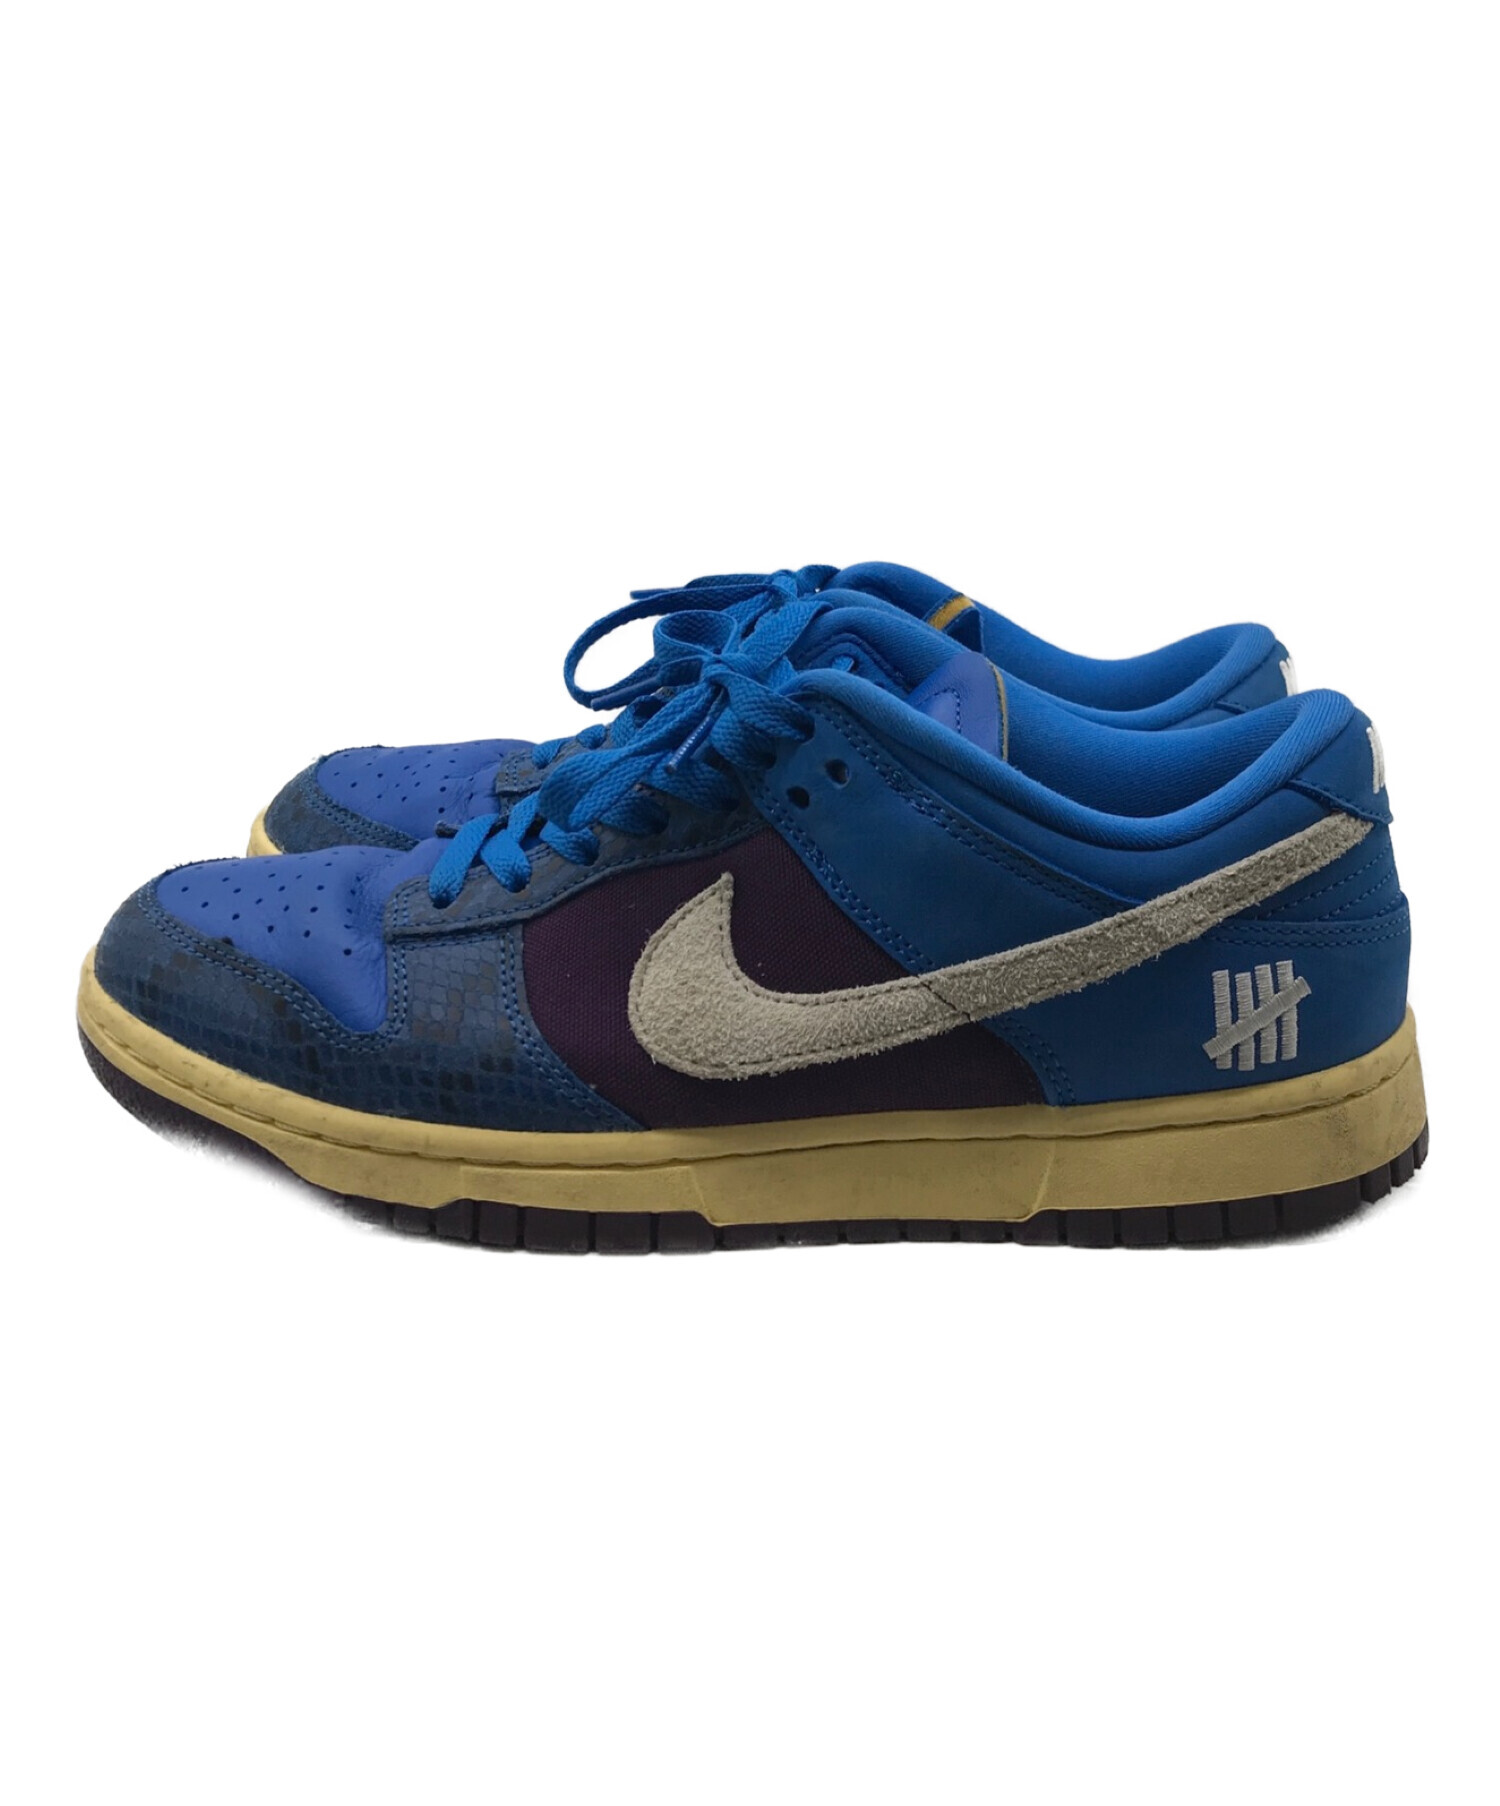 NIKE DUNK LOW SP / UNDFTD DH6508-400